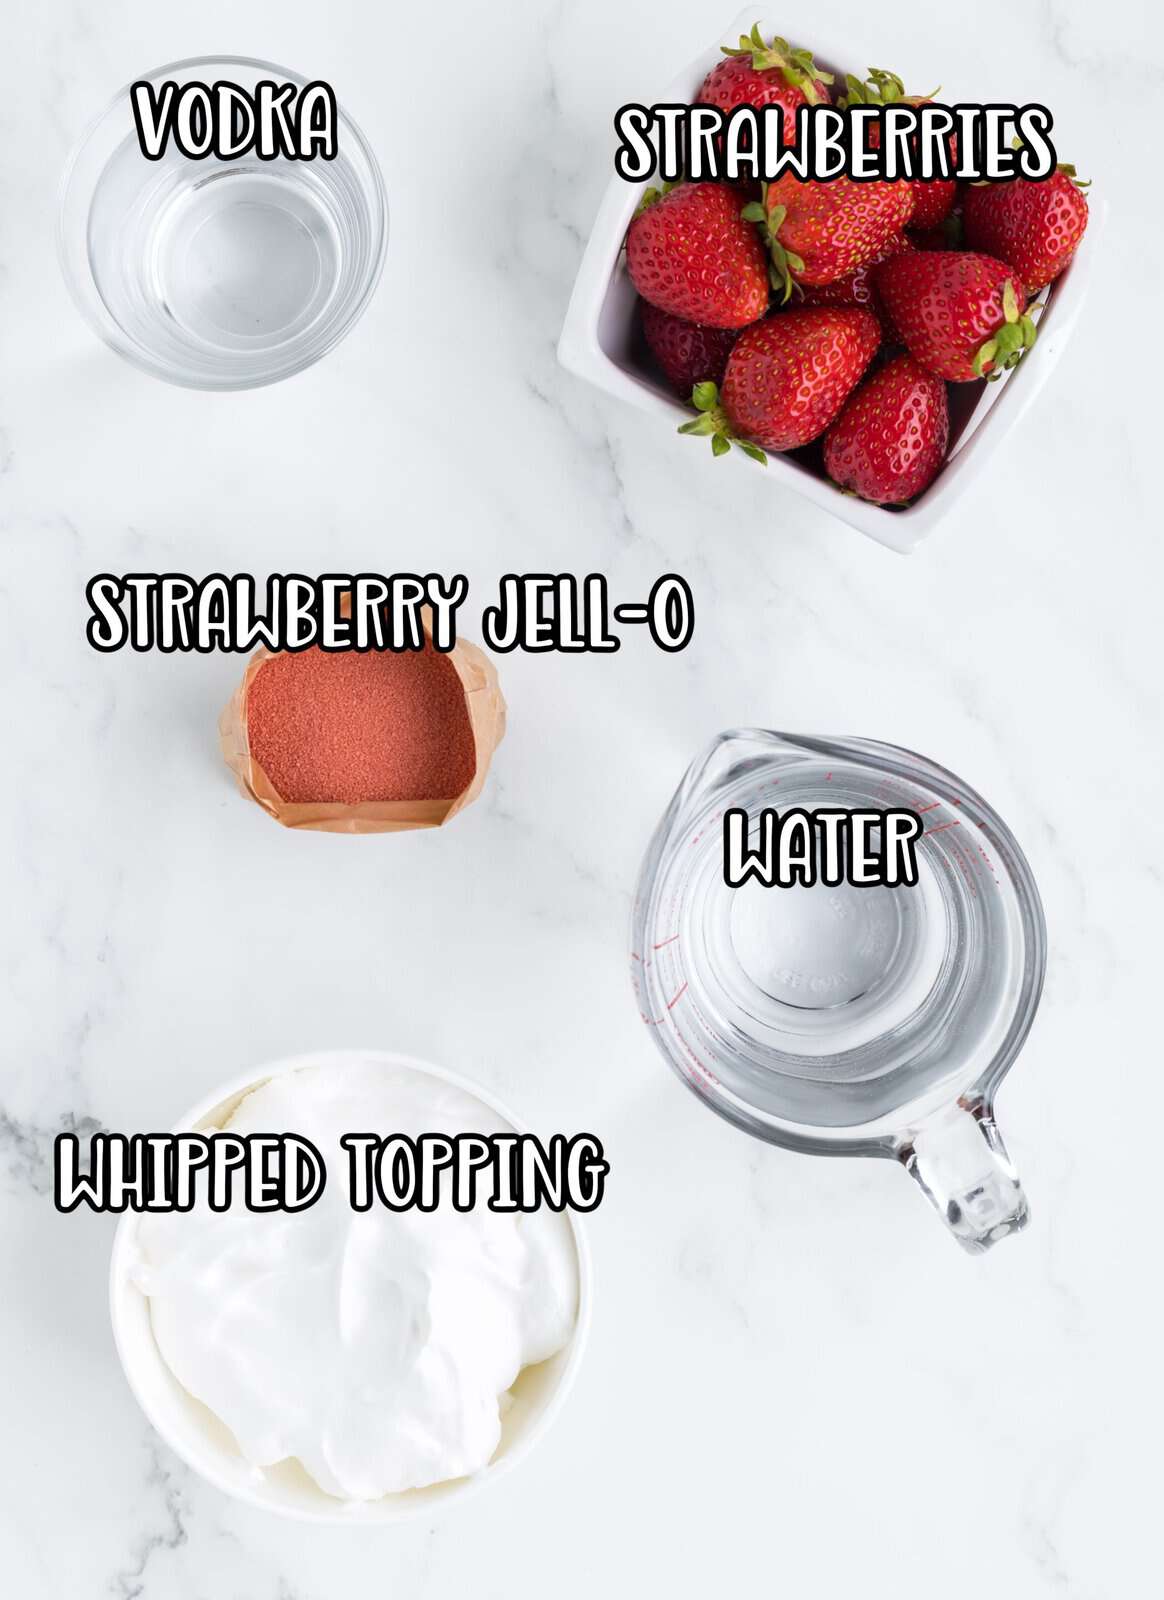 Strawberries, water, strawberry jell-o, whipped topping and vanilla extract.